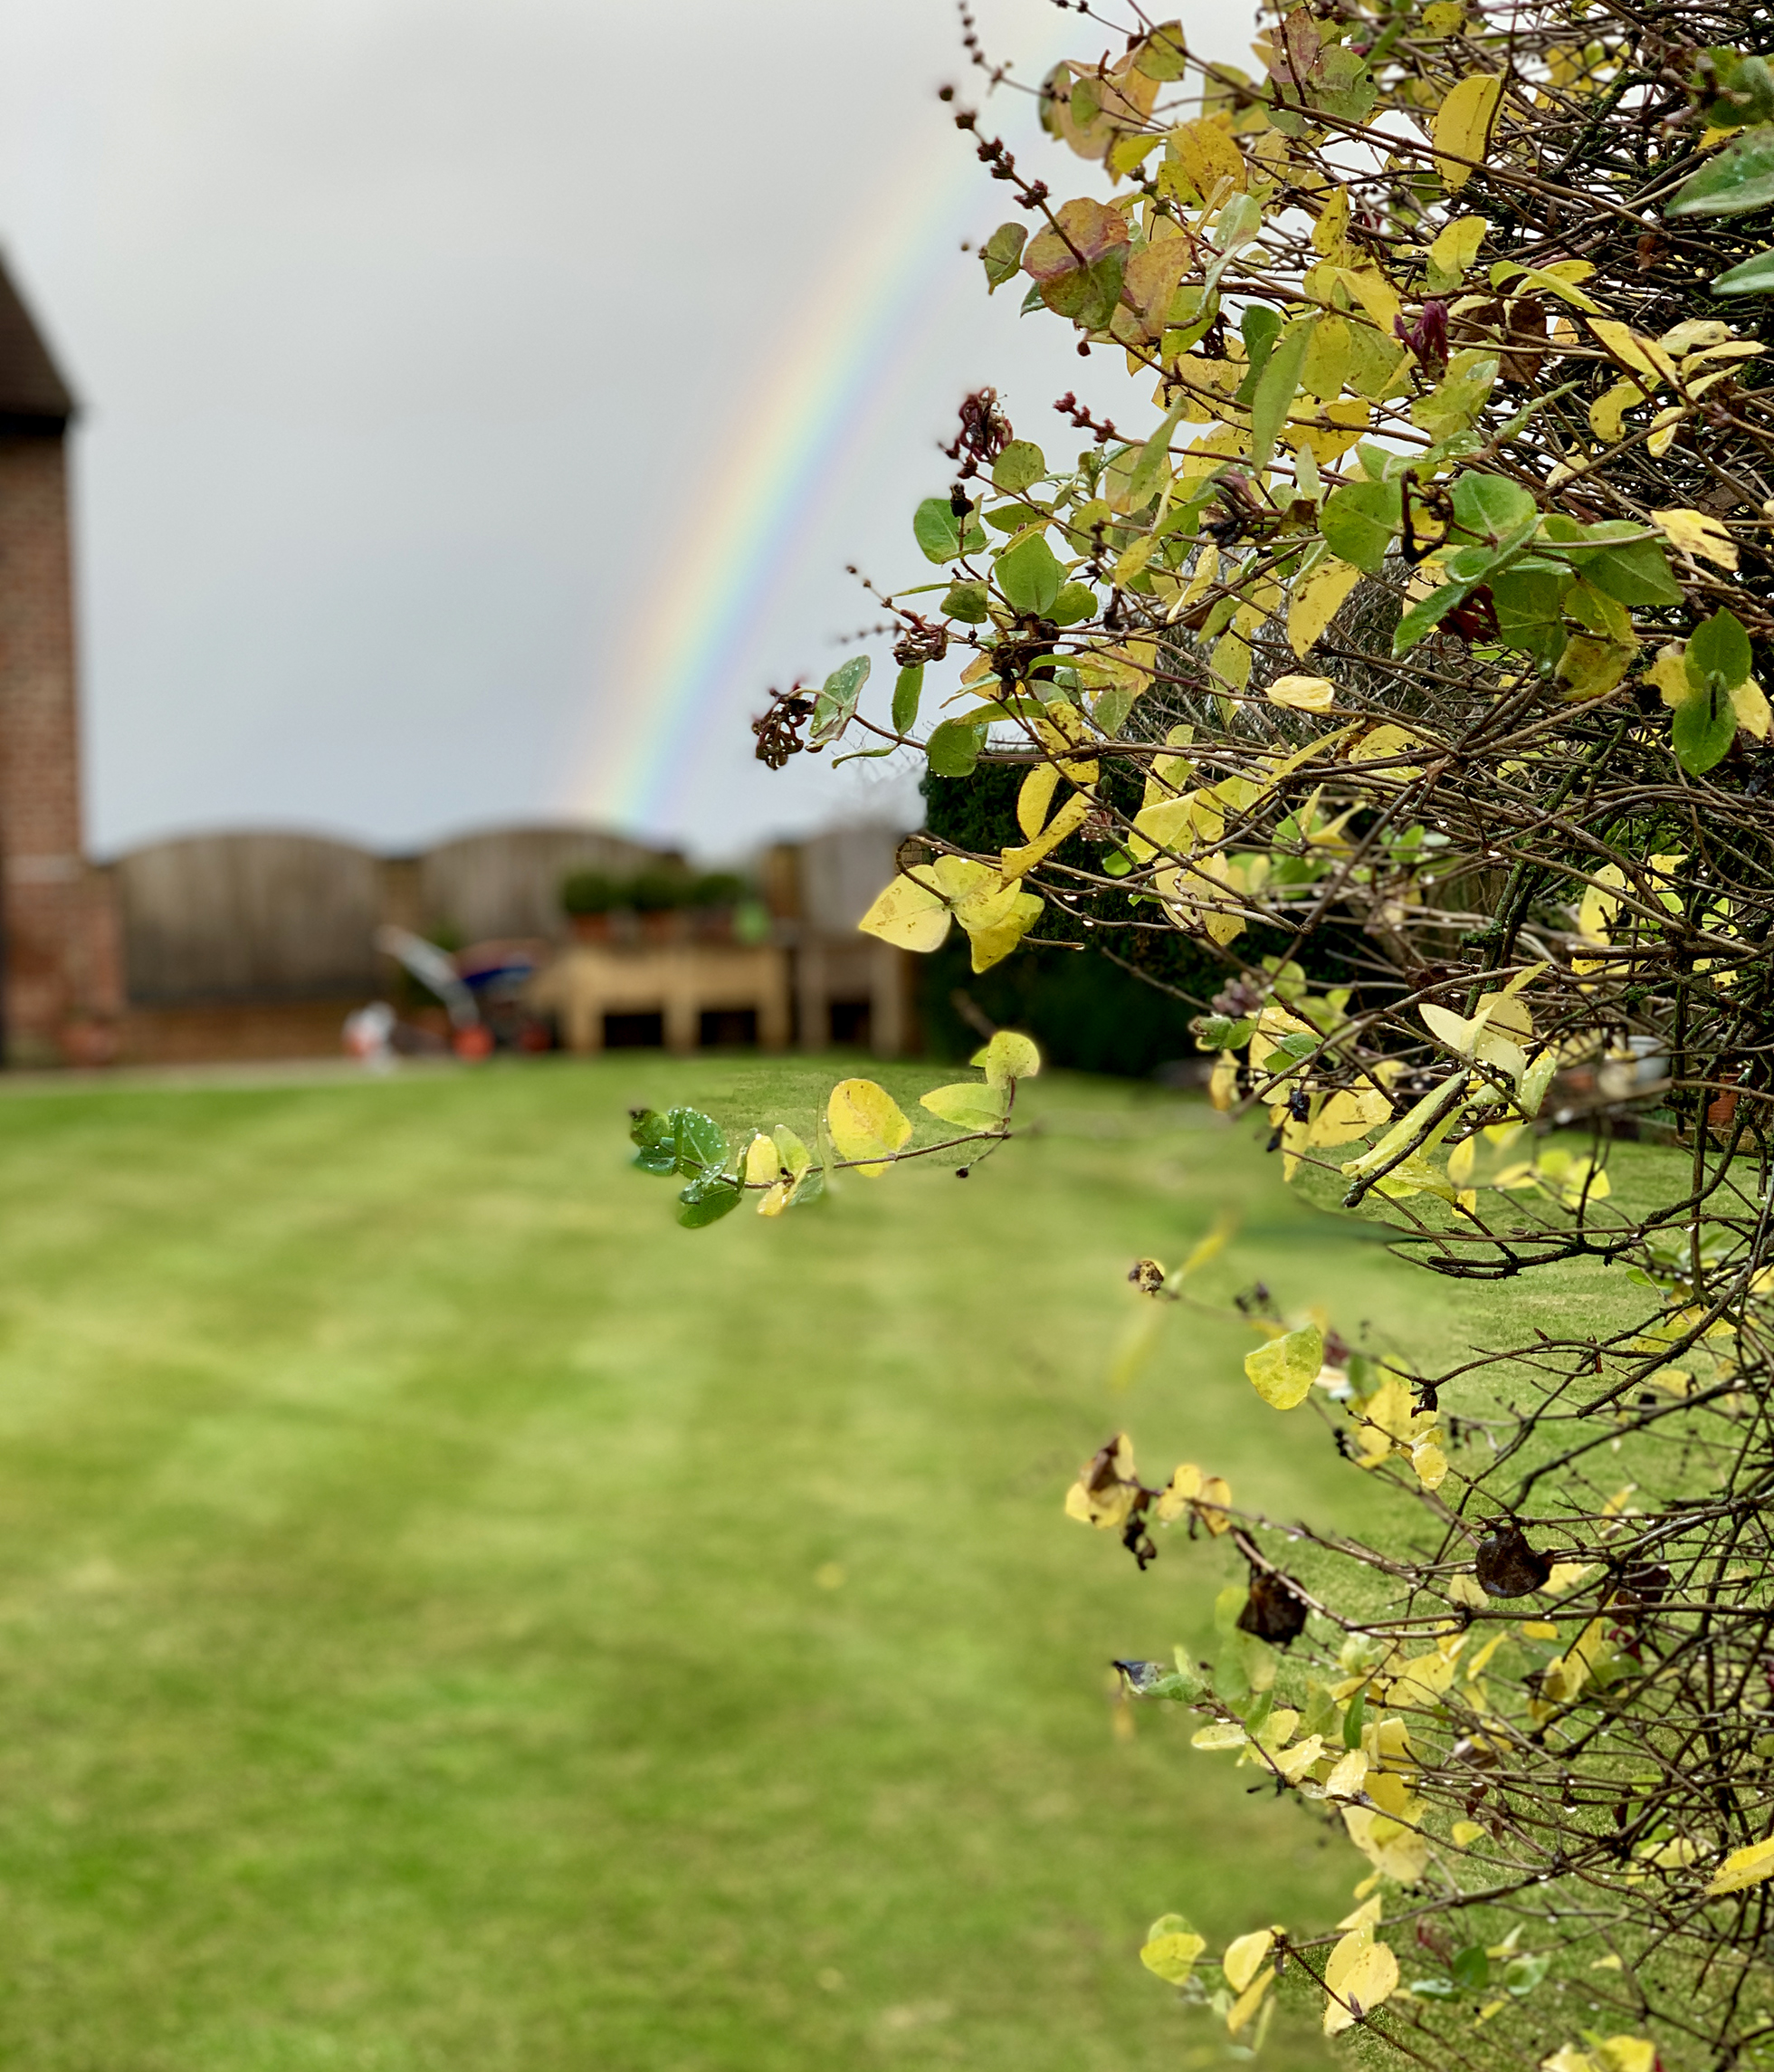 Lush, green lawn with home and rainbow in the distance